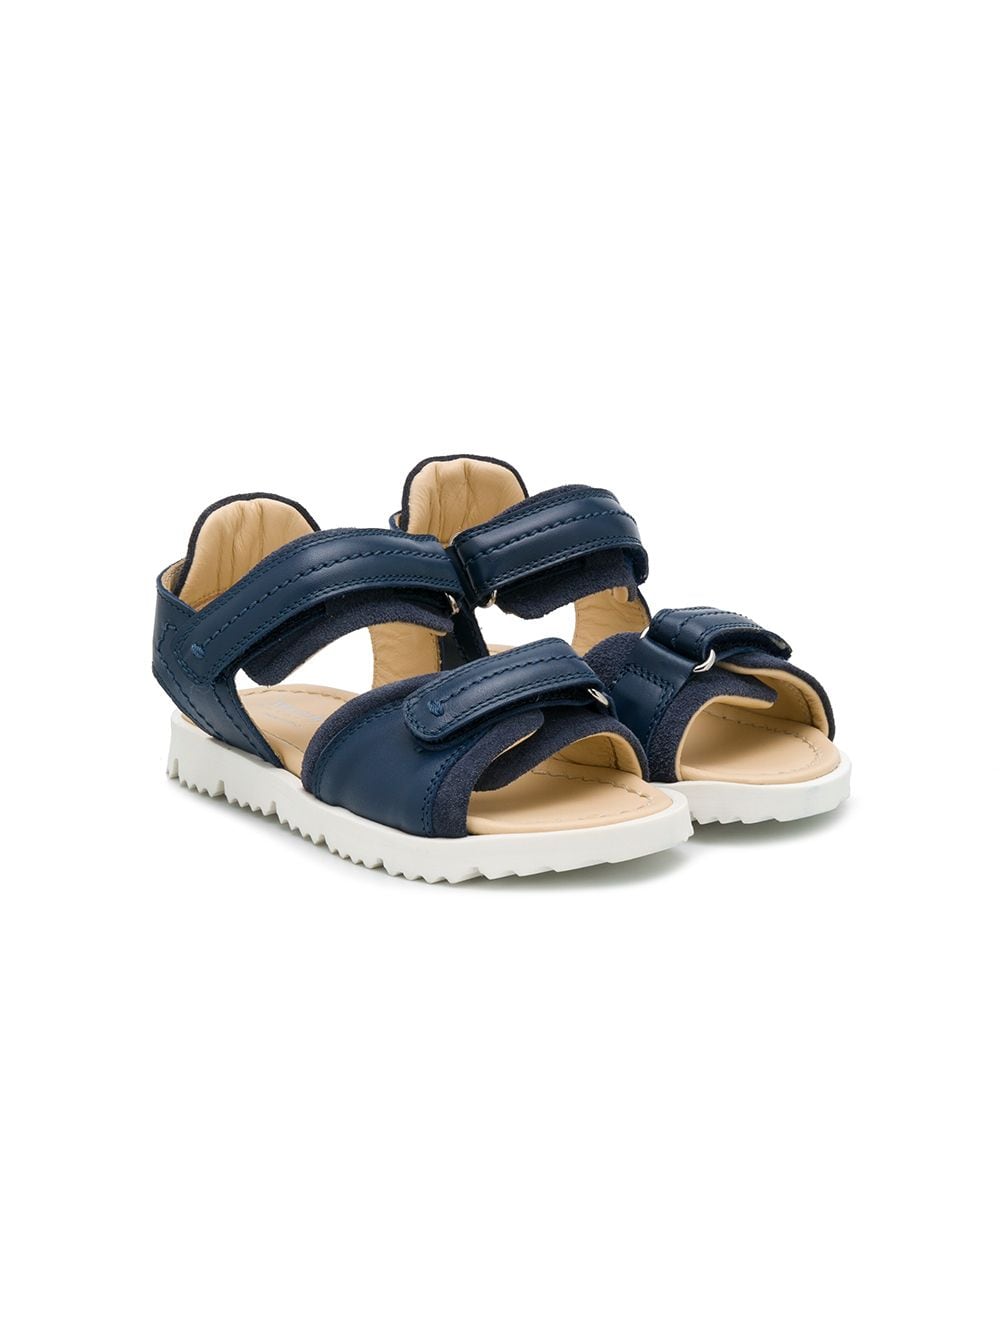 MONTELPARE TRADITION TEEN MULTIPLE STRAP FLAT SANDALS